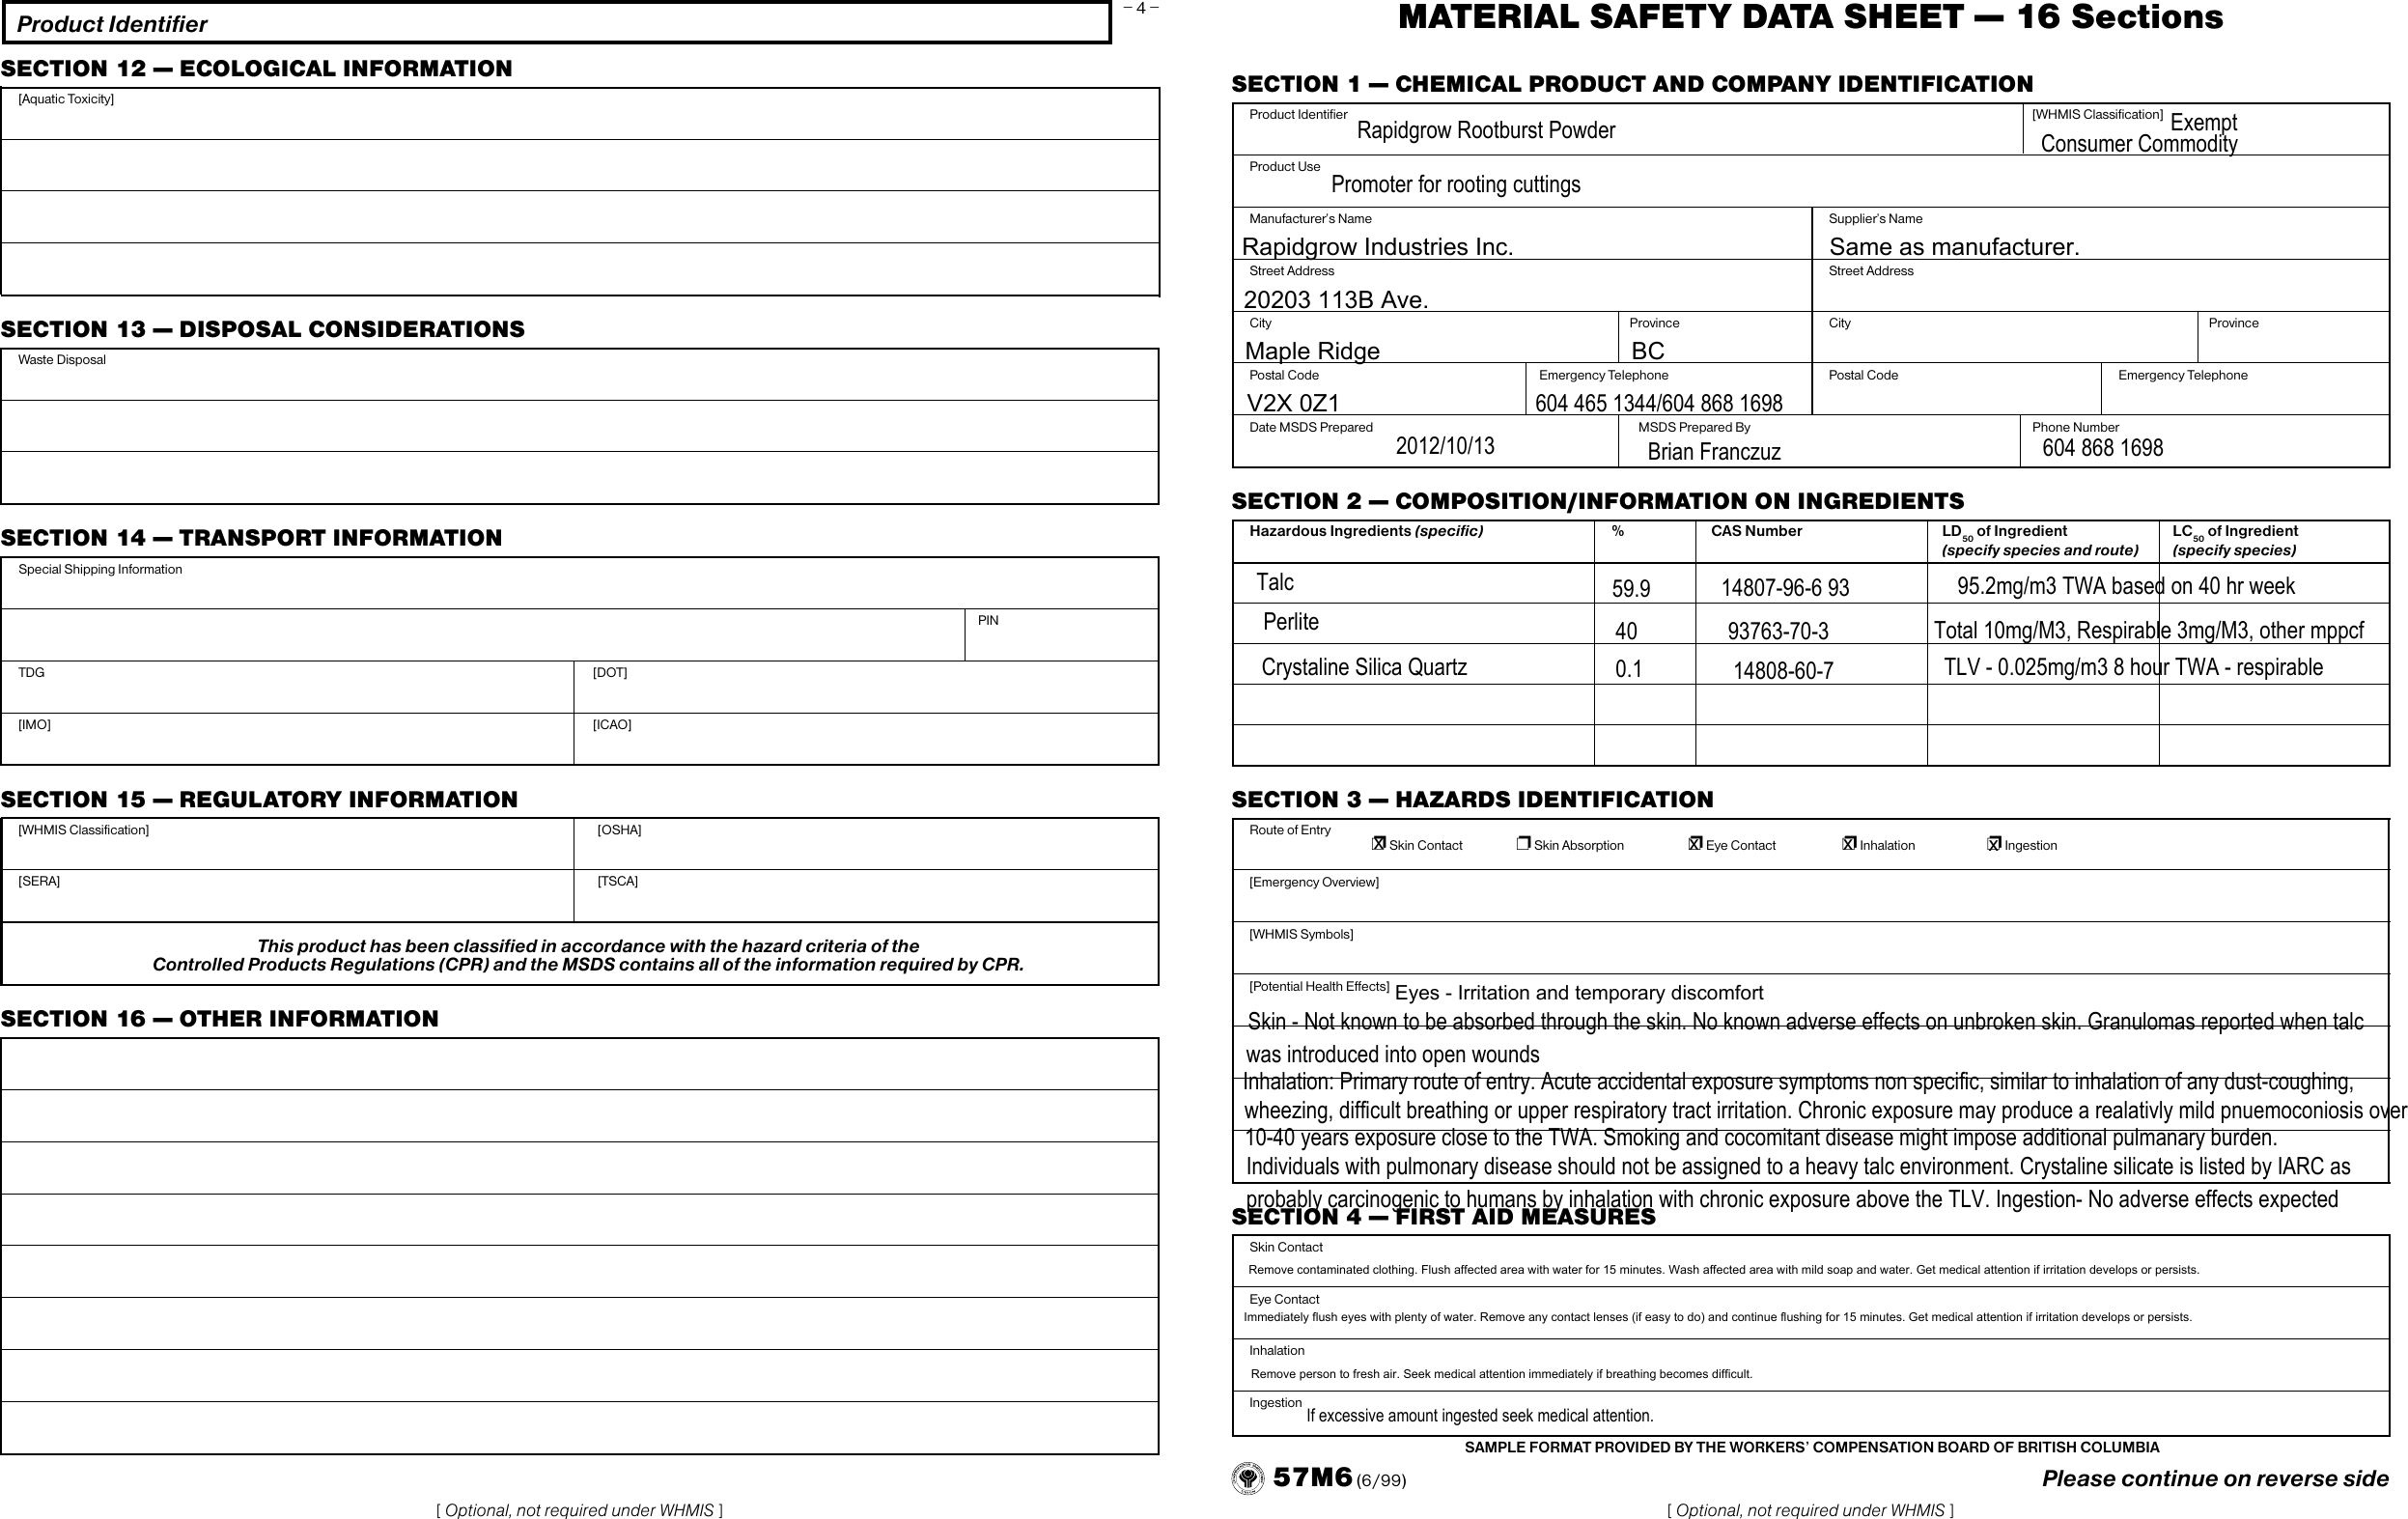 Page 1 of 4 - Material Safety Data Sheet -- 16 Sections  717376 MSDS